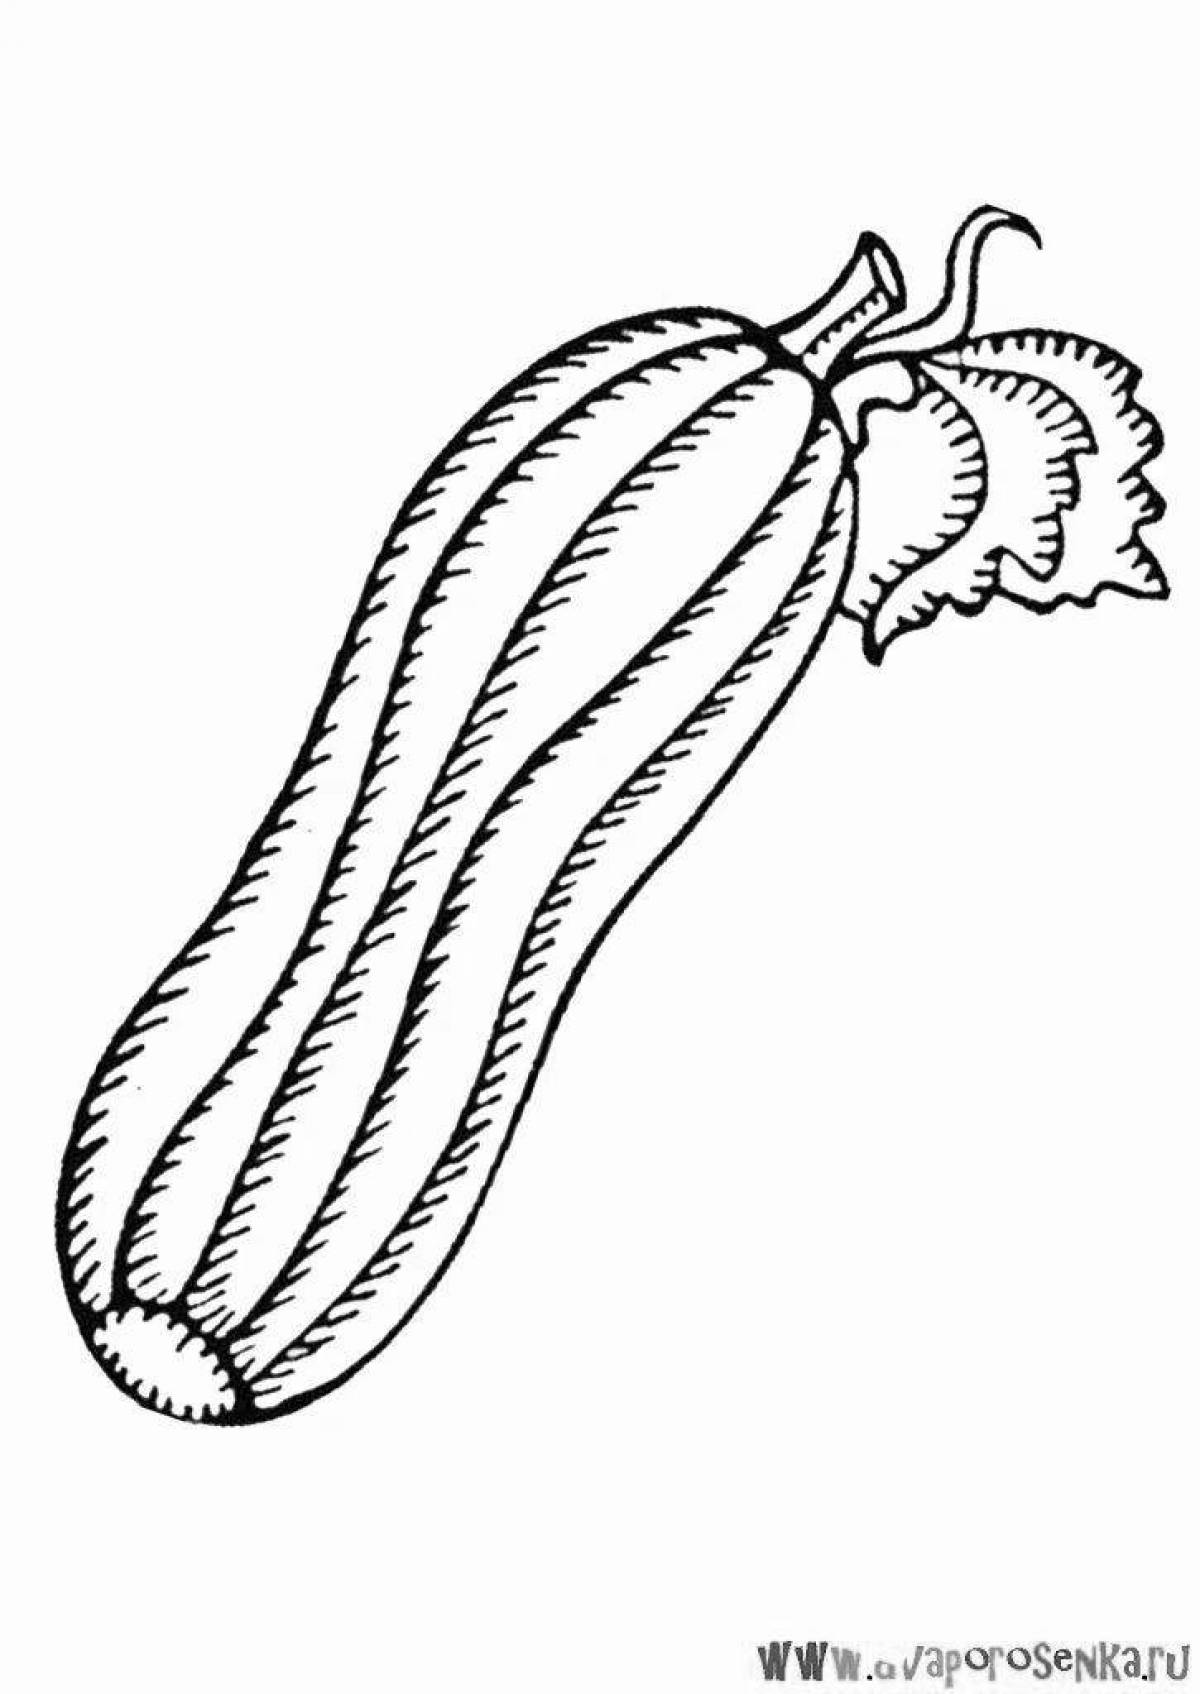 Intriguing zucchini coloring page